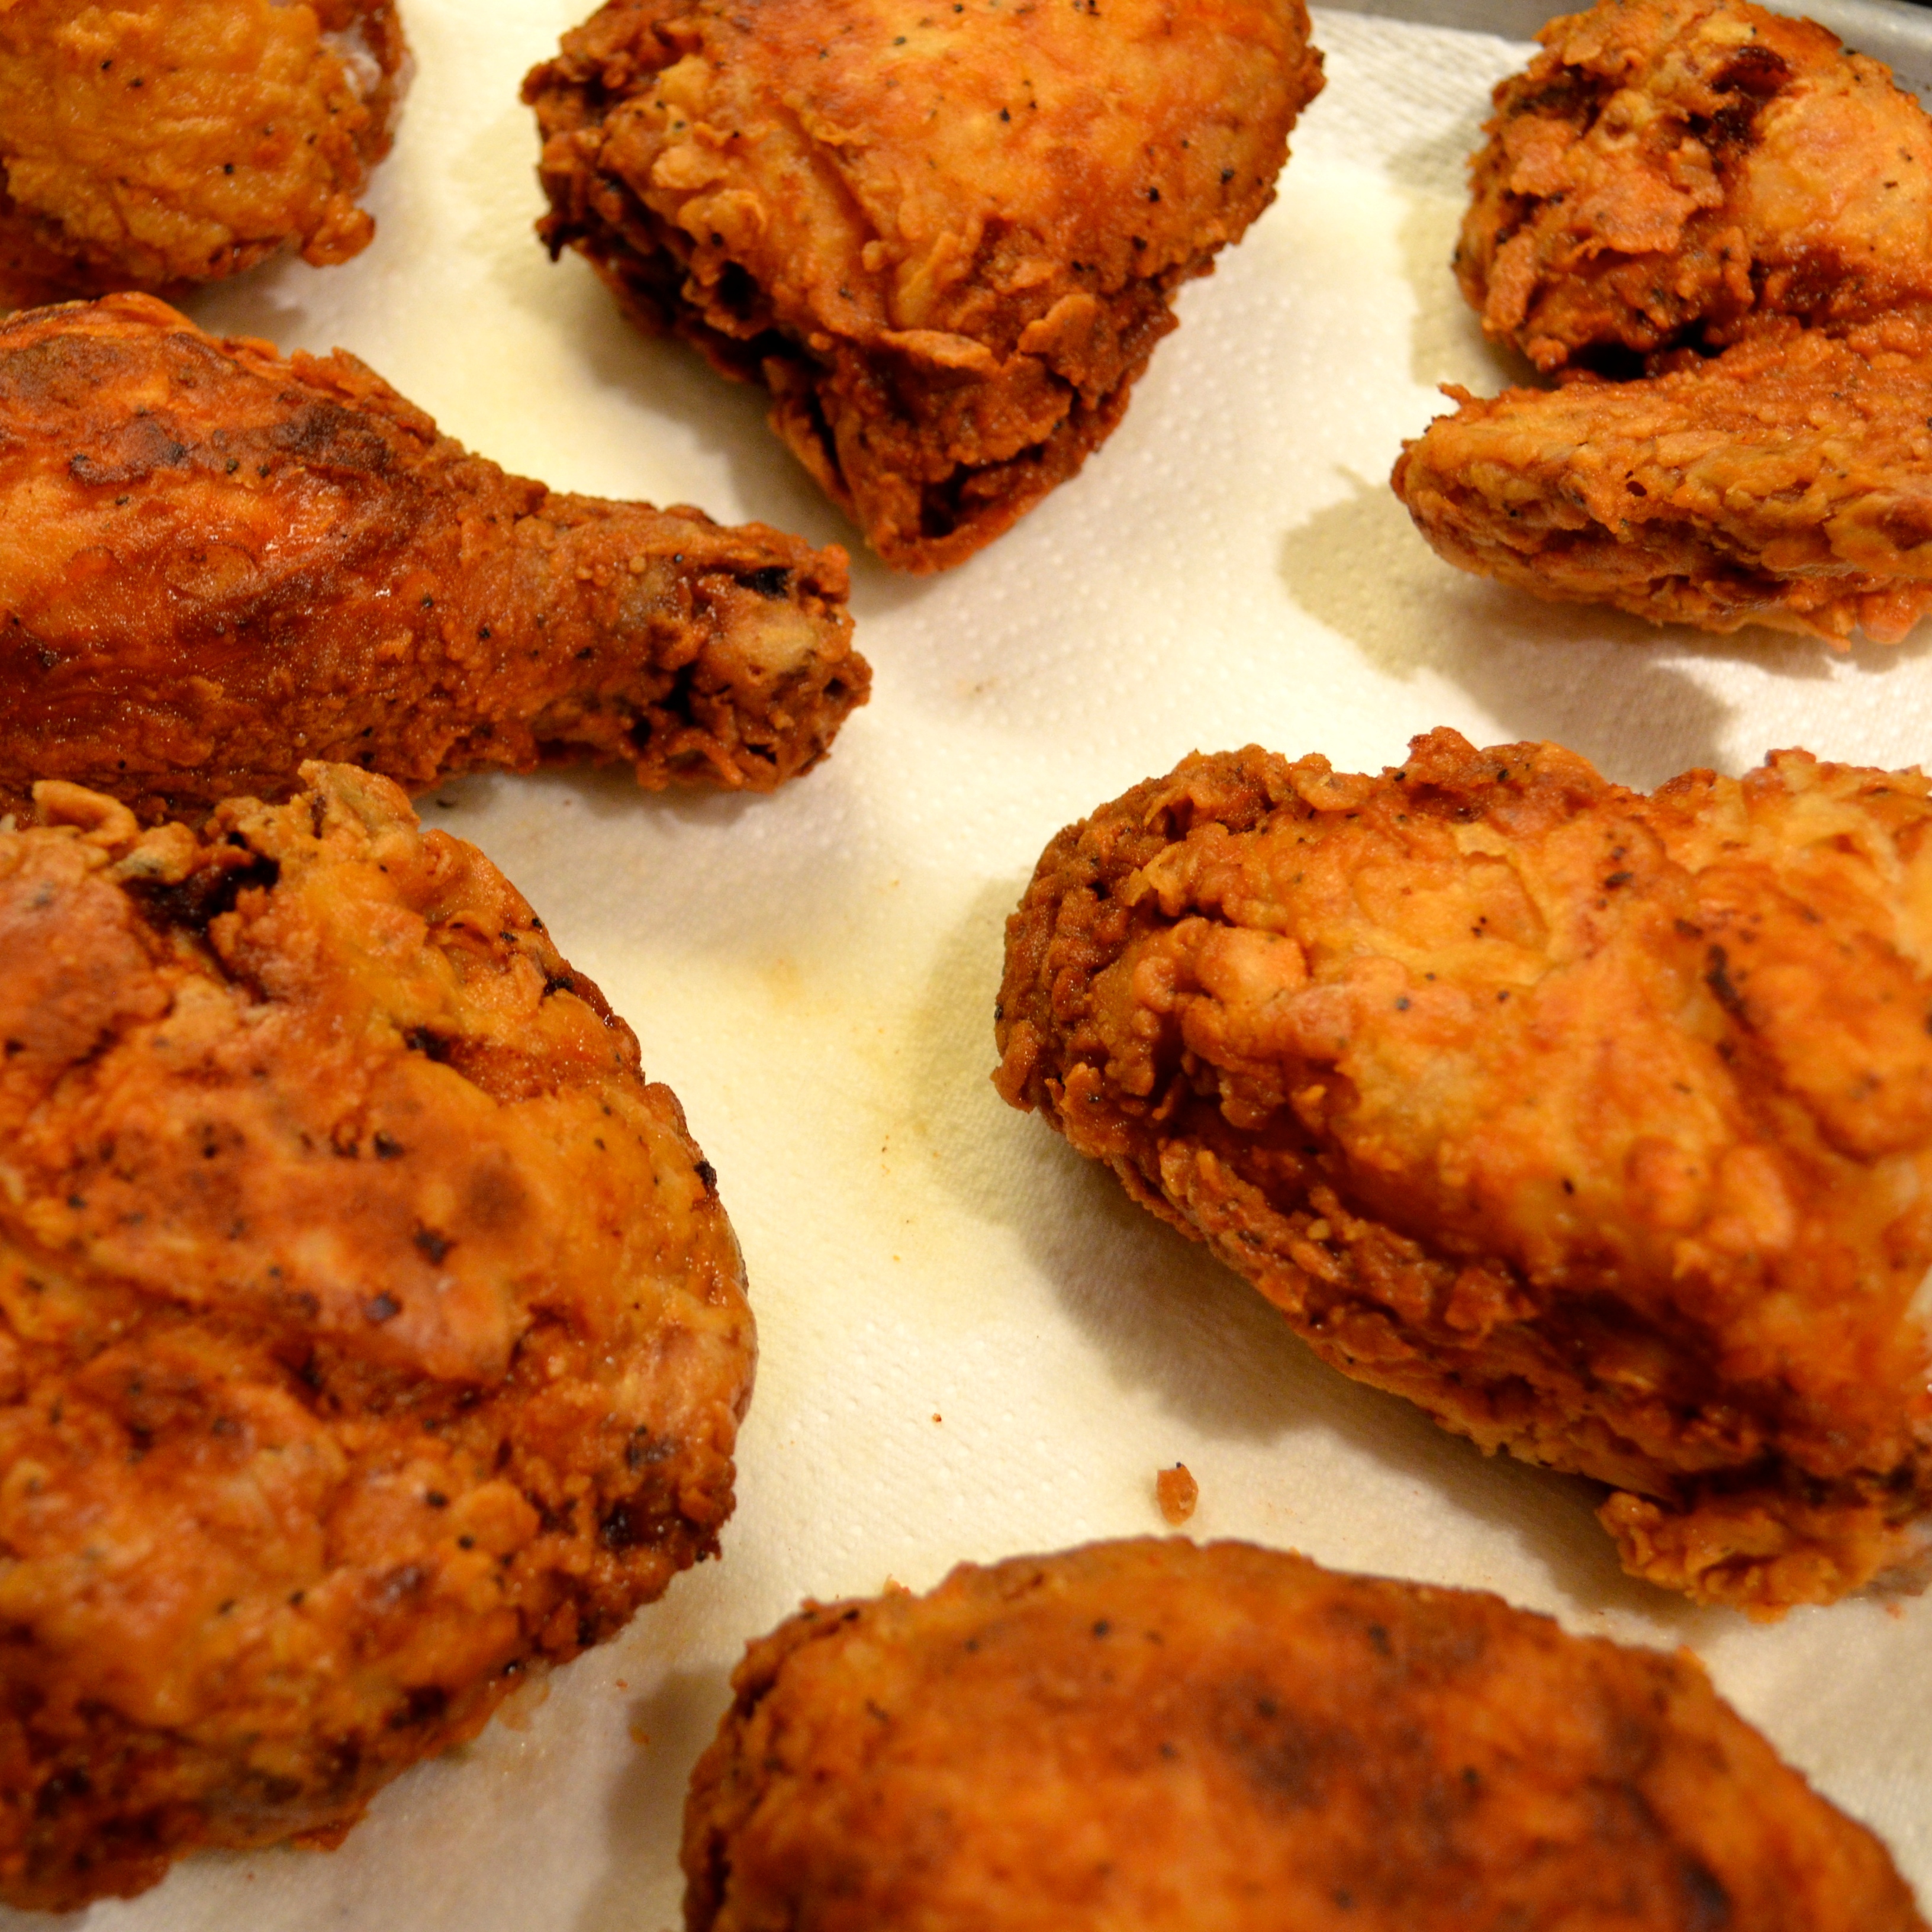 Busting More Fried Chicken Myths (How To Make The BEST Fried Chicken) :  r/MythicalKitchen